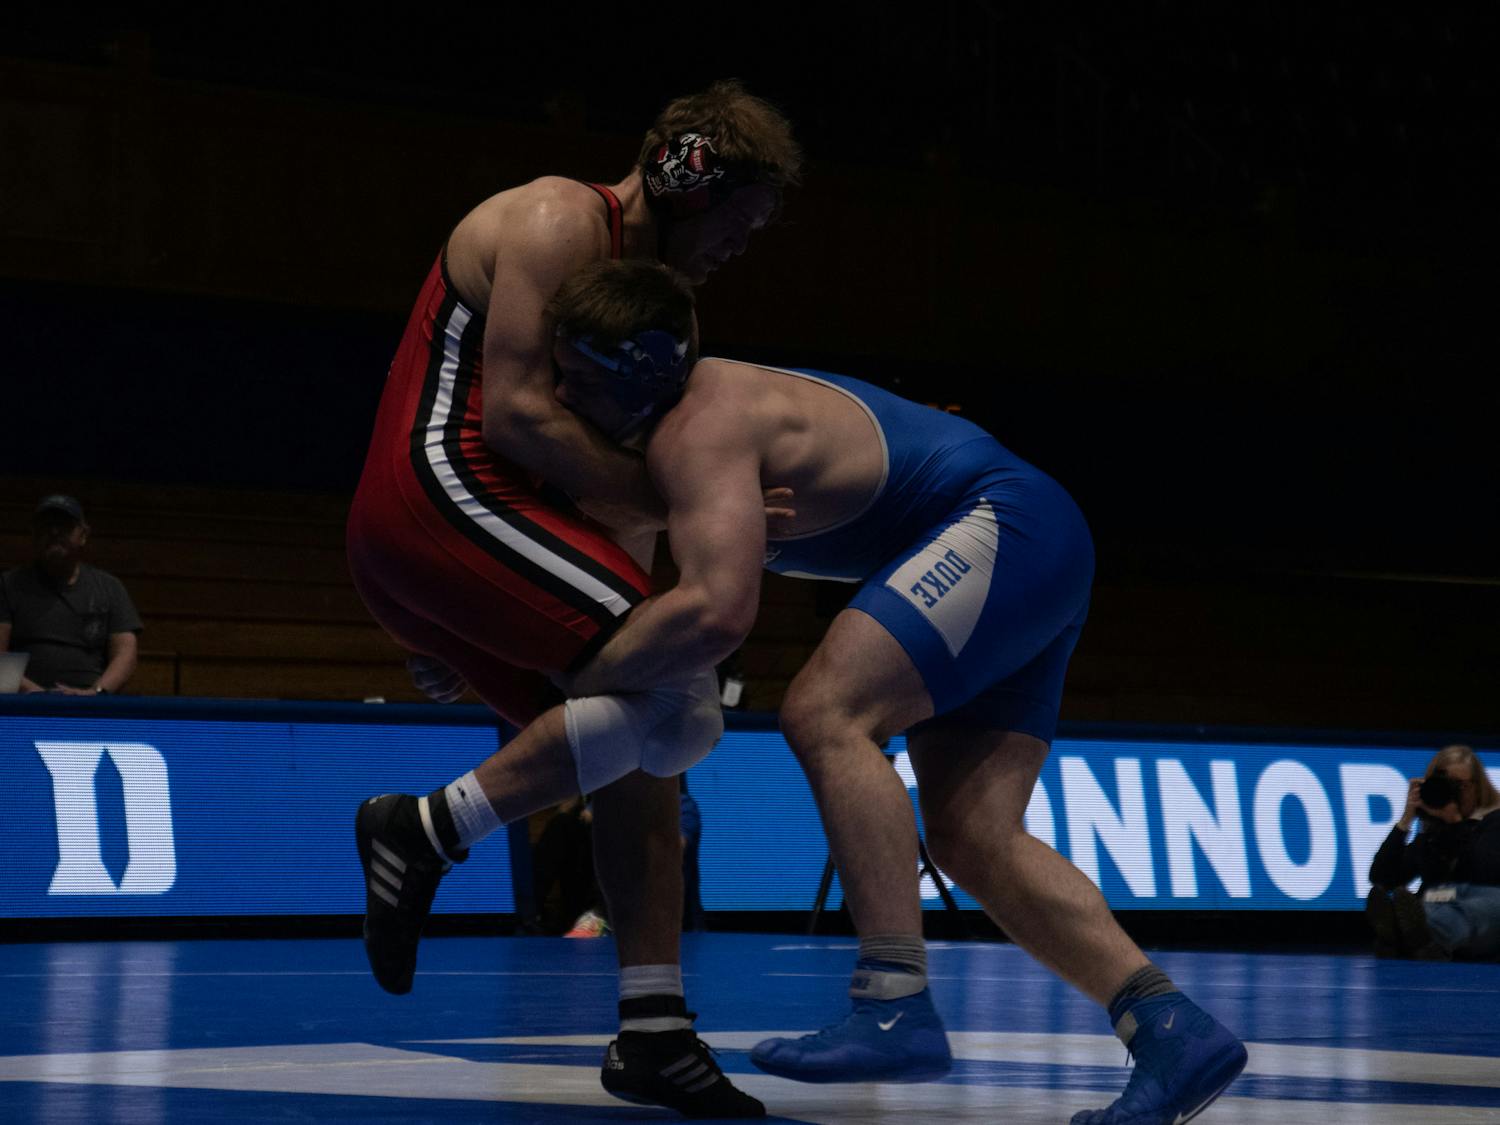 With their loss to N.C. State, the Blue Devils still have yet to win an ACC match this season.